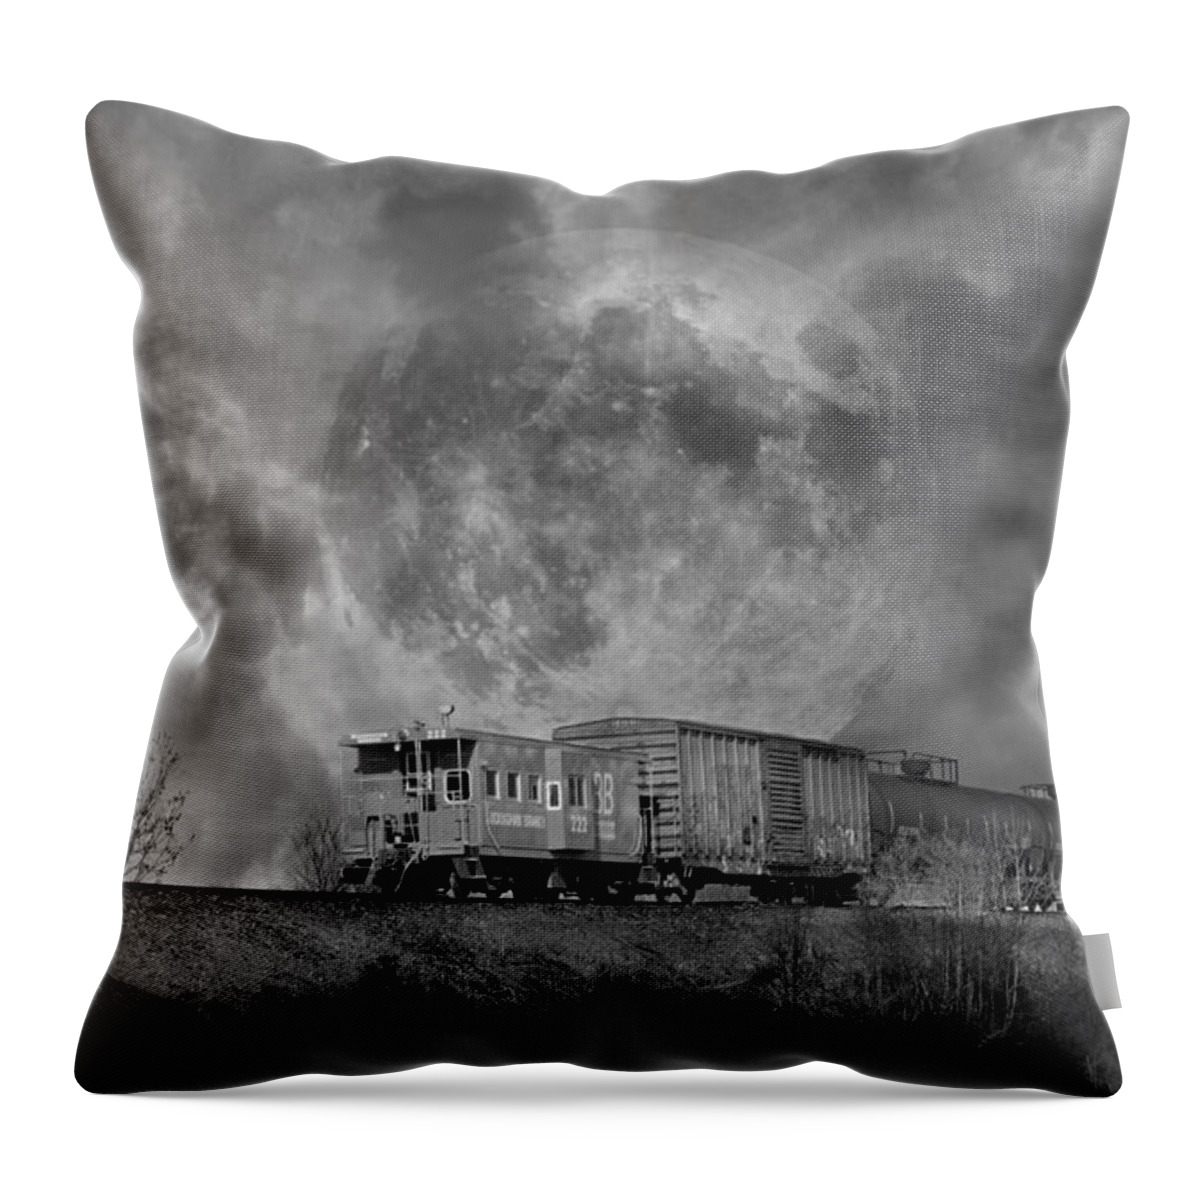 Full Throw Pillow featuring the photograph Trainscape by Betsy Knapp